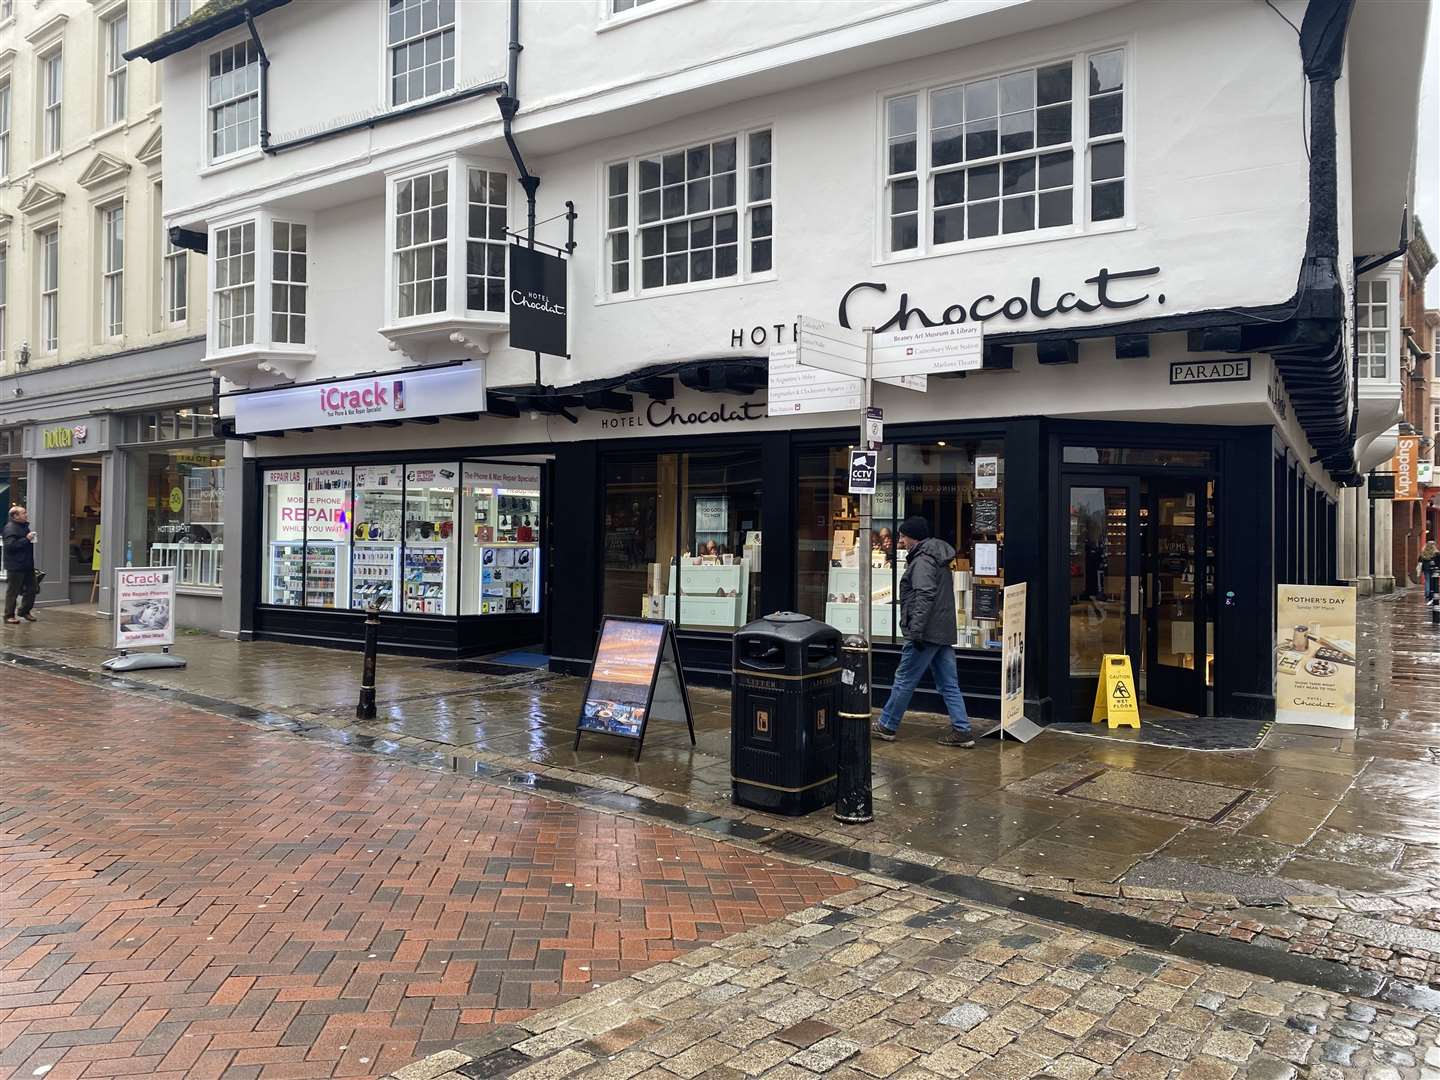 One of the other properties in Arora's portfolio, at 8-9 The Parade in Canterbury, is home to iCrack and Hotel Chocolat